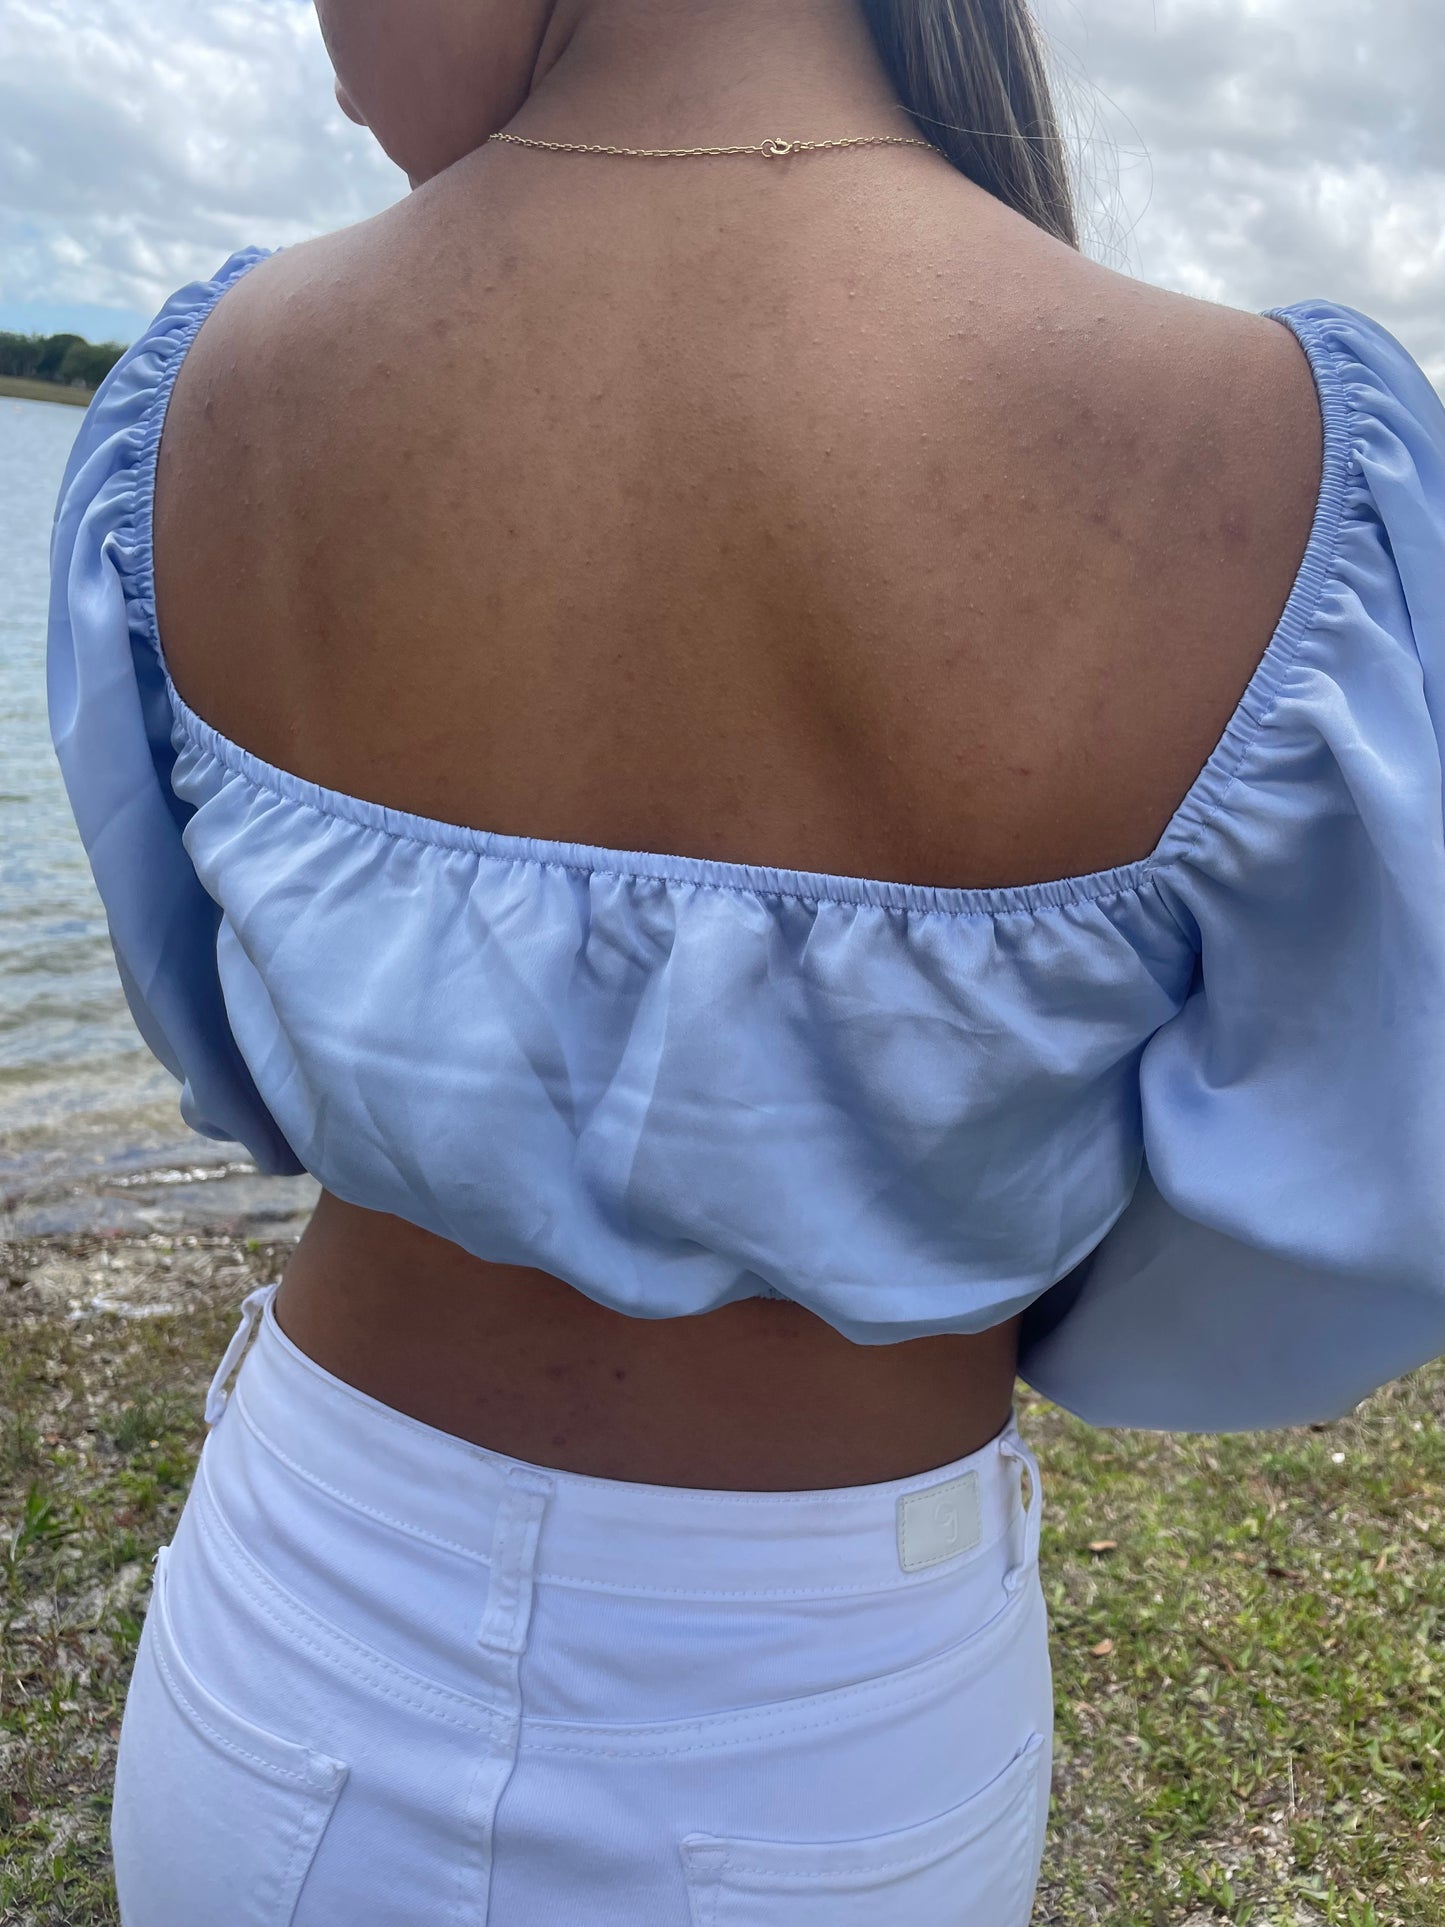 Puffy Long Sleeve Knotted Self Tie Crop Top